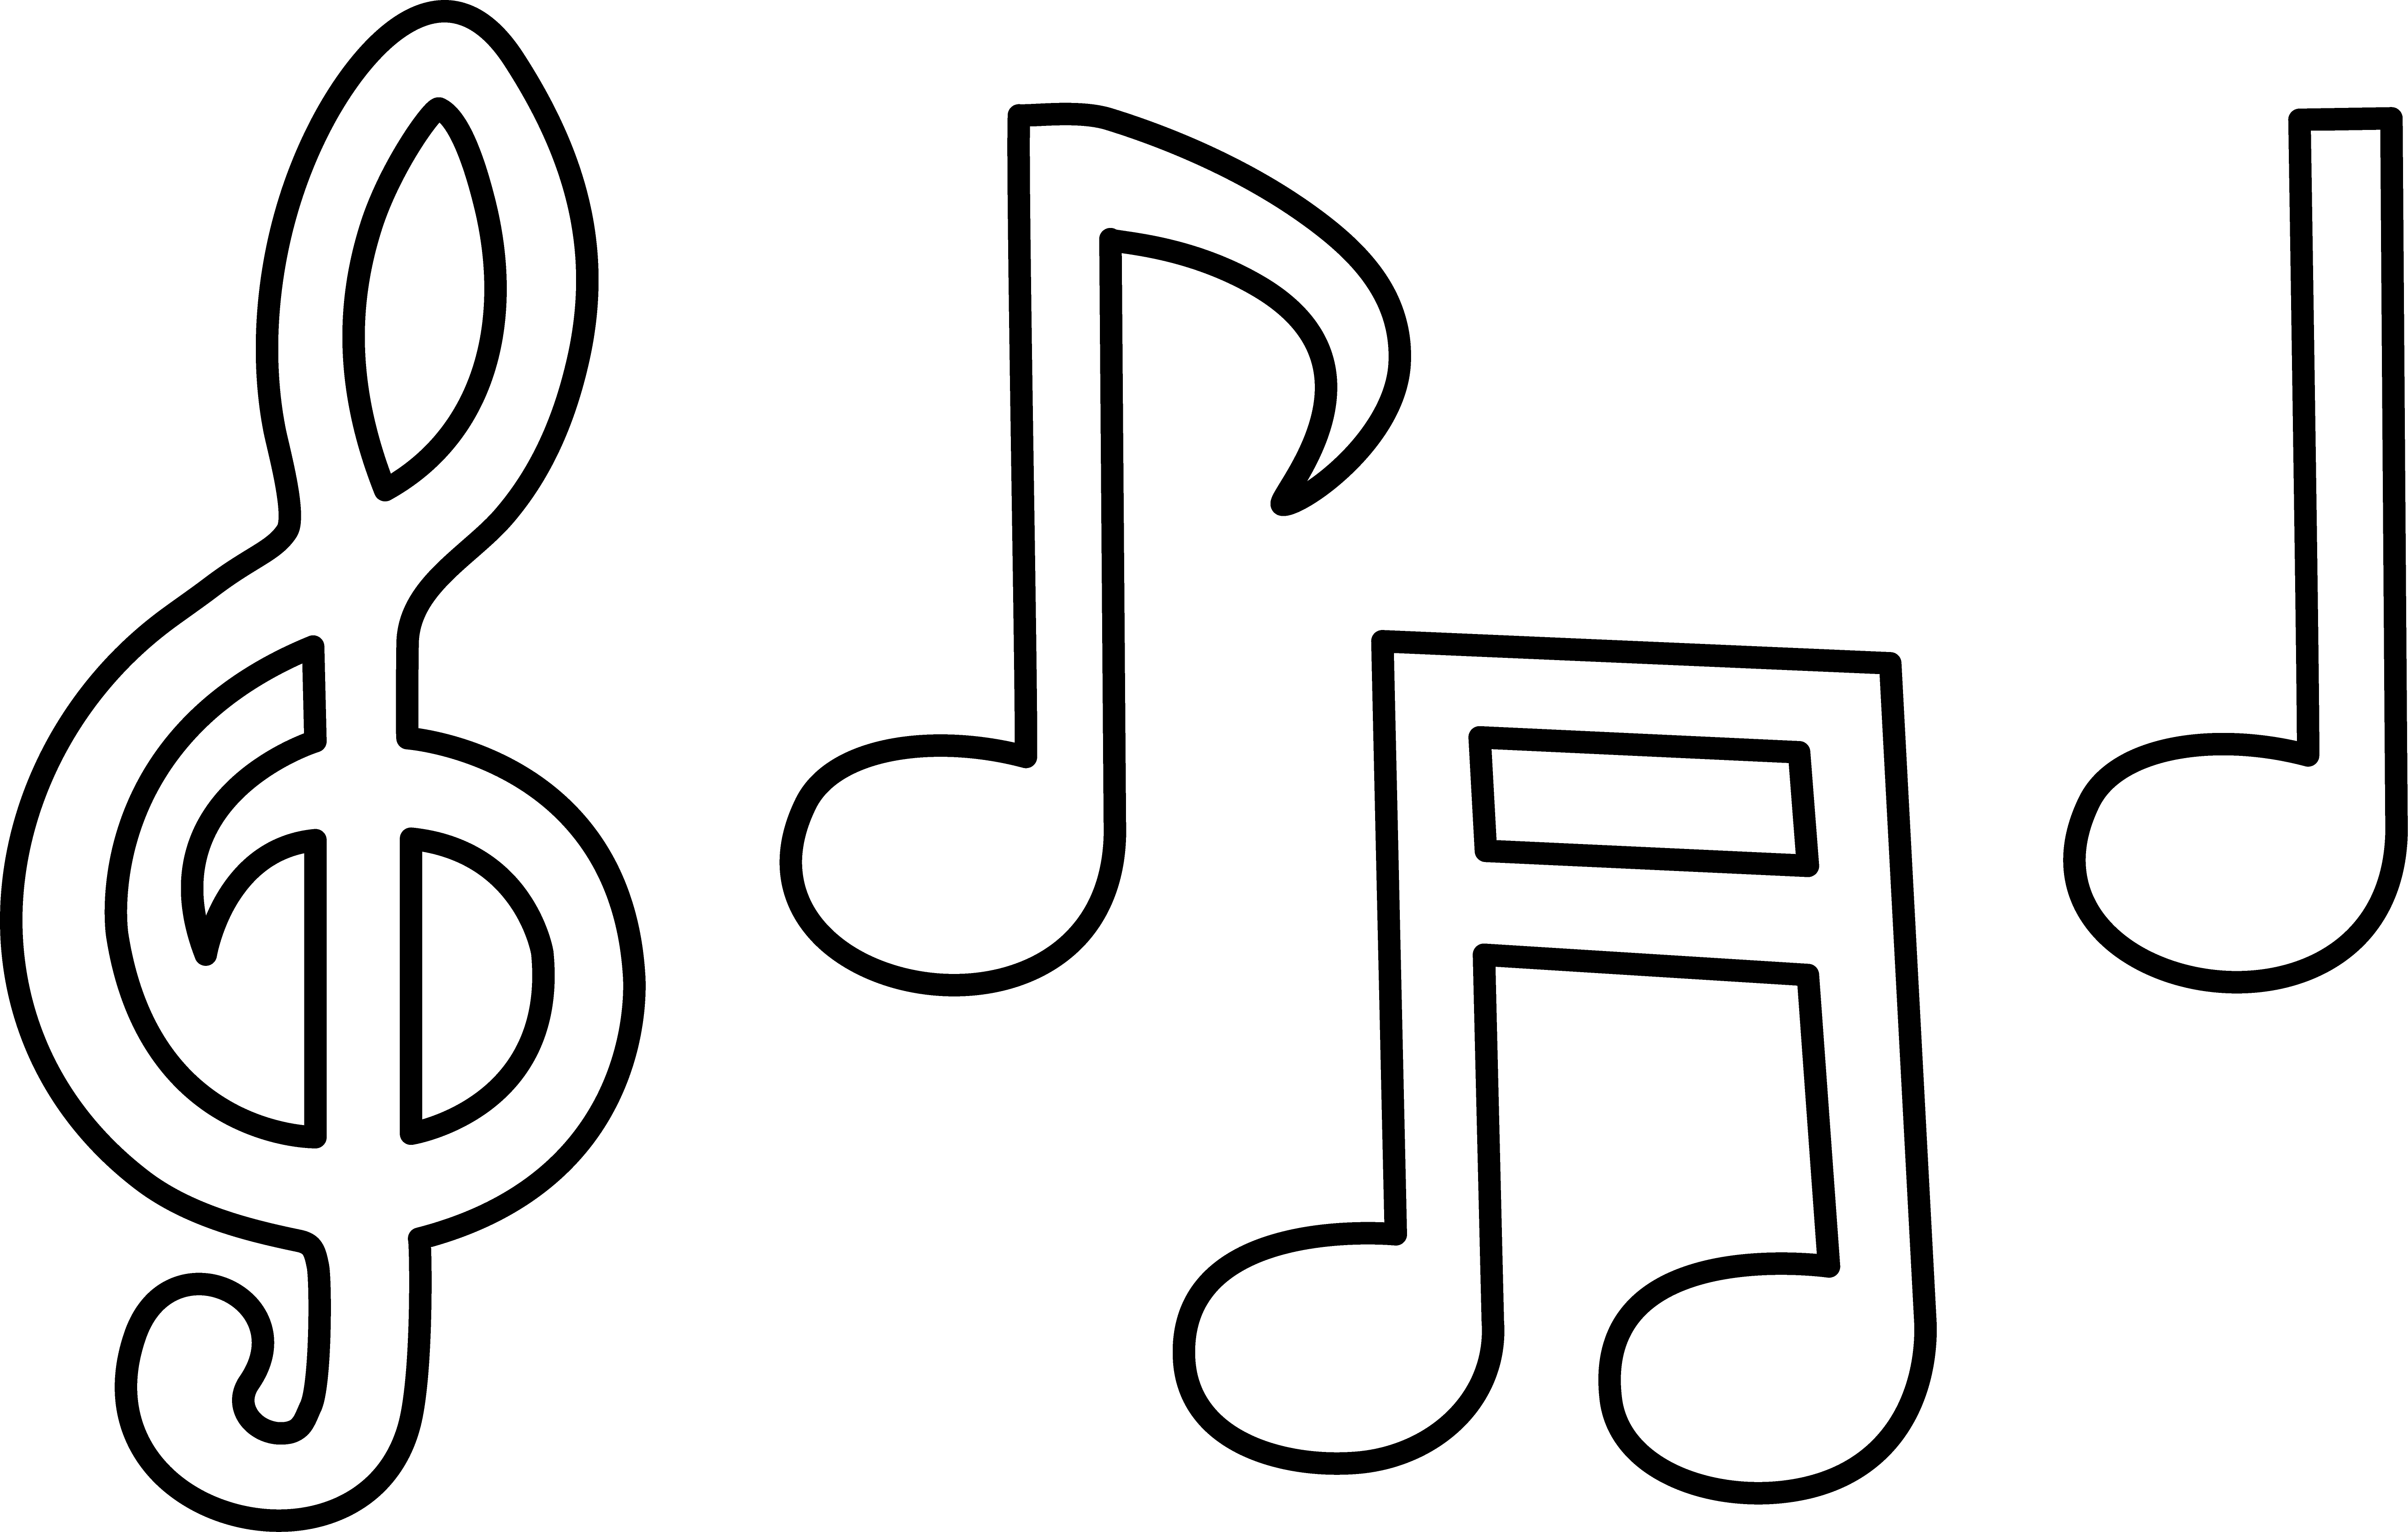 Music Notes Symbols Clip Art | Clipart library - Free Clipart Images